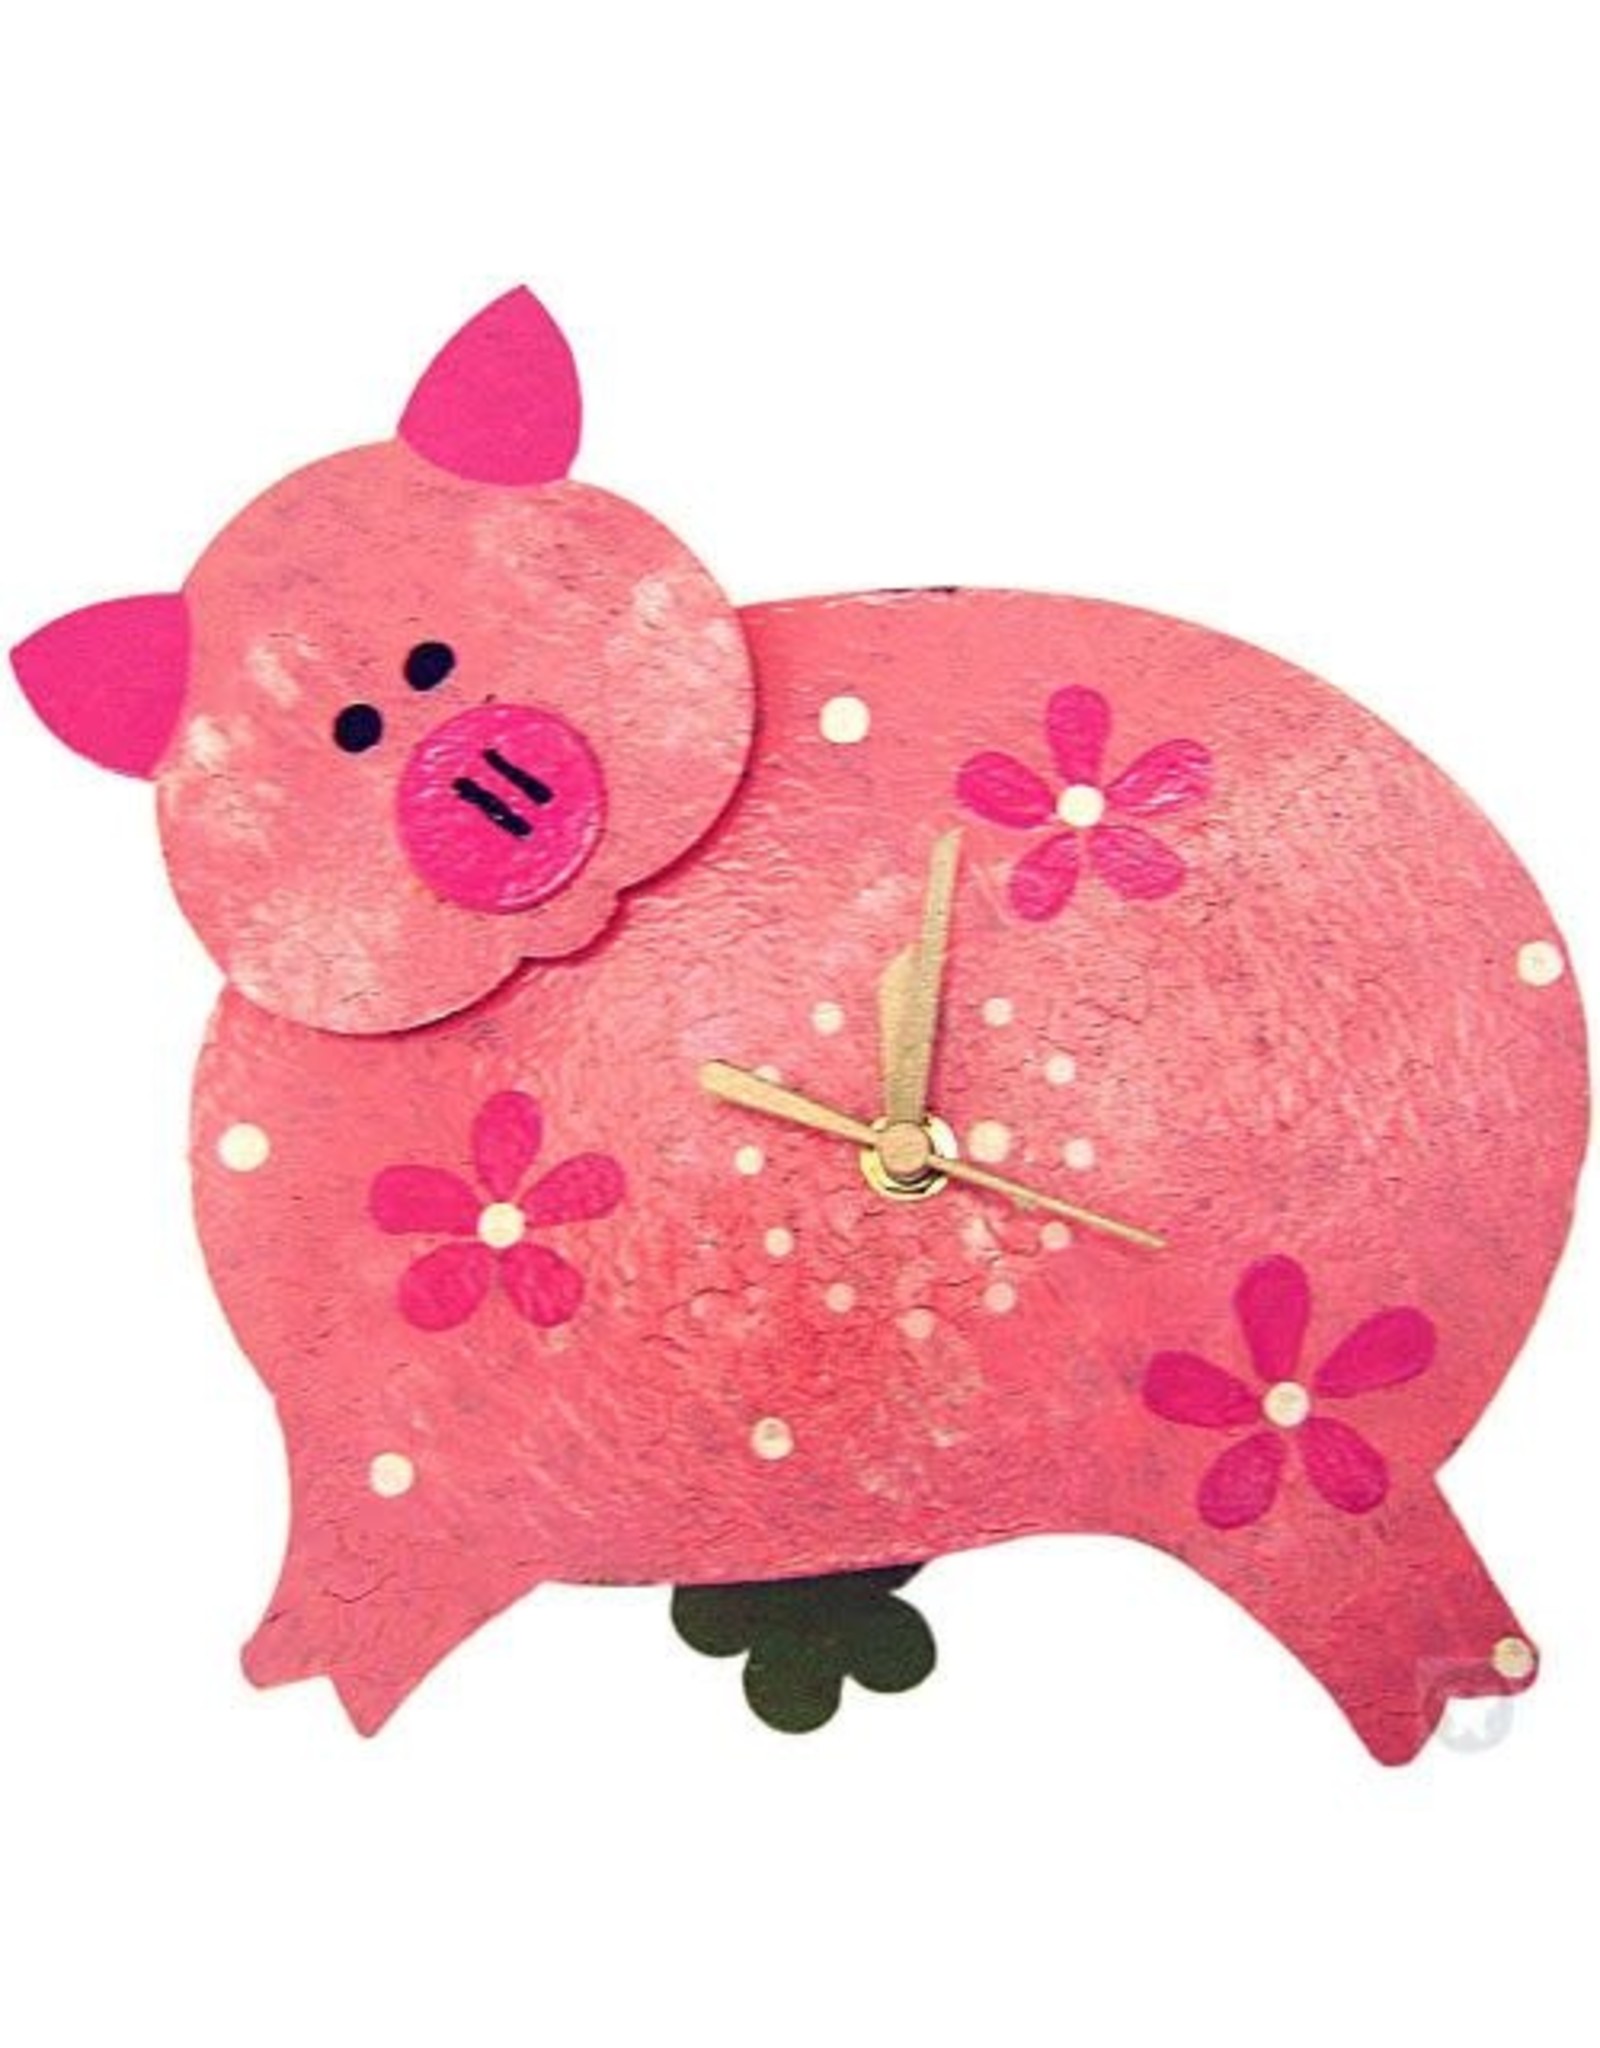 Trade roots Silly Clock Pig, Pink, Colombia